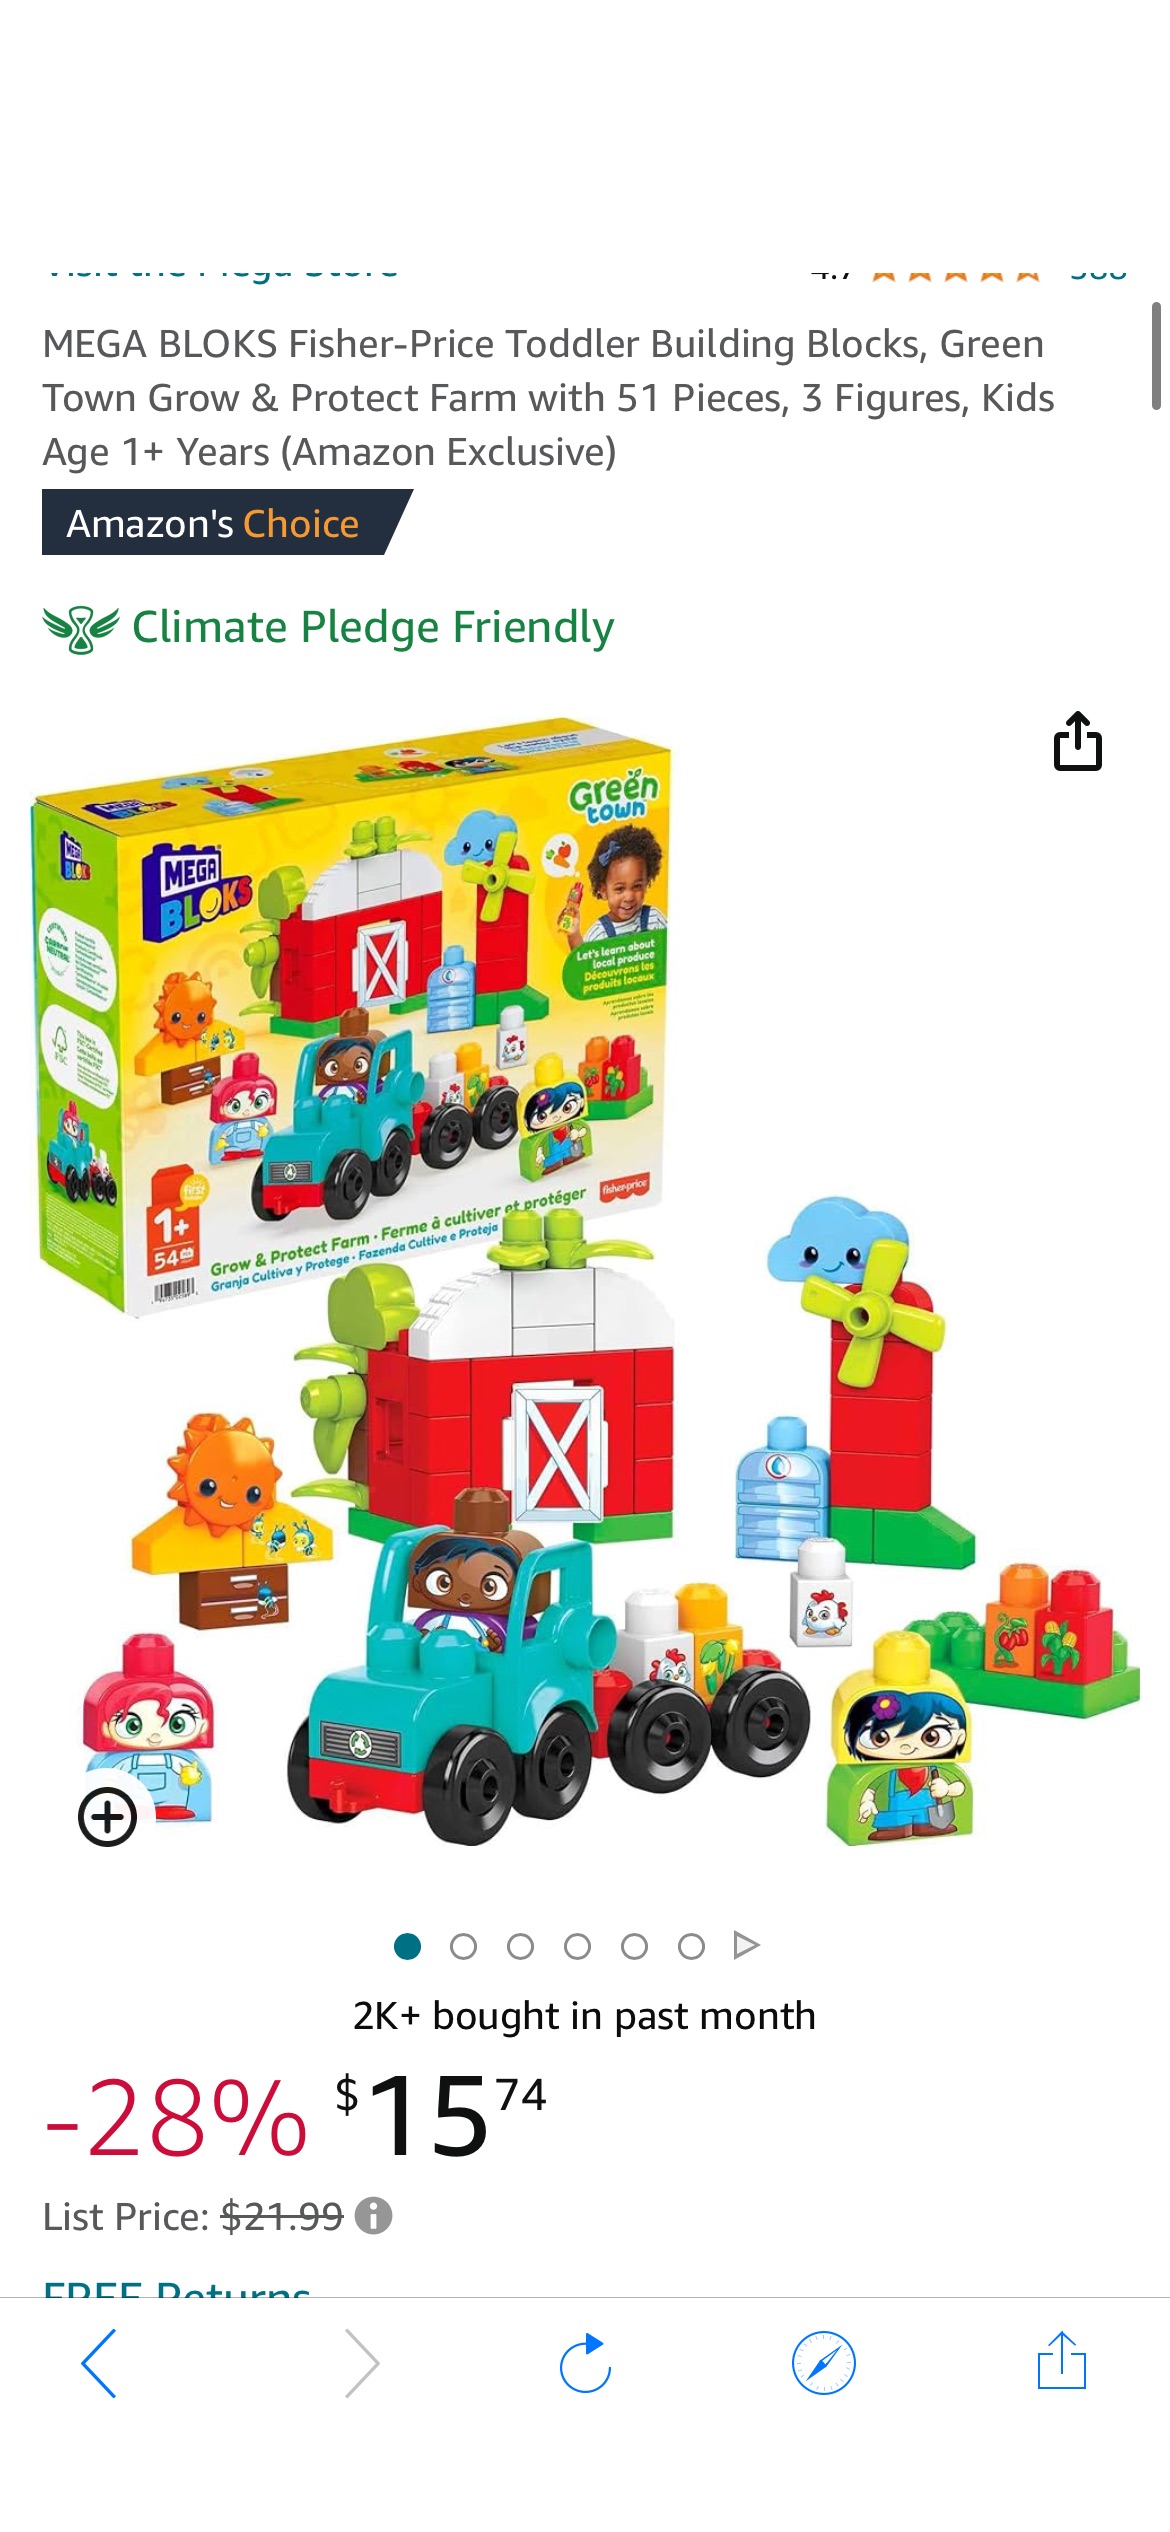 Amazon.com: MEGA BLOKS Fisher-Price Toddler Building Blocks, Green Town Grow & Protect Farm with 51 Pieces, 3 Figures, Kids Age 1+ Years (Amazon Exclusive) : Toys & Games乐高